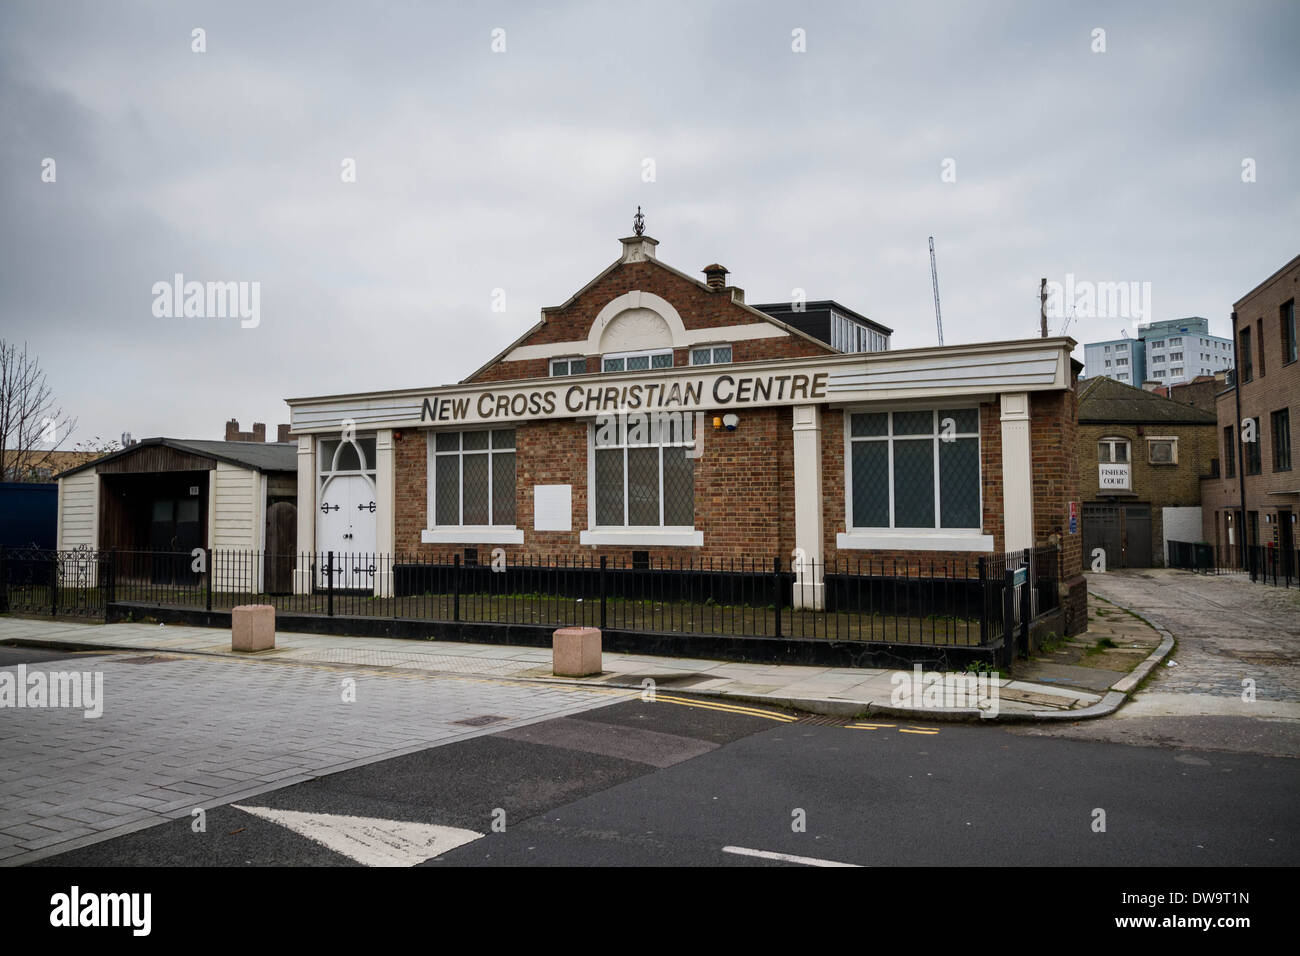 New Cross Christian Centre in South East London, UK. Stock Photo